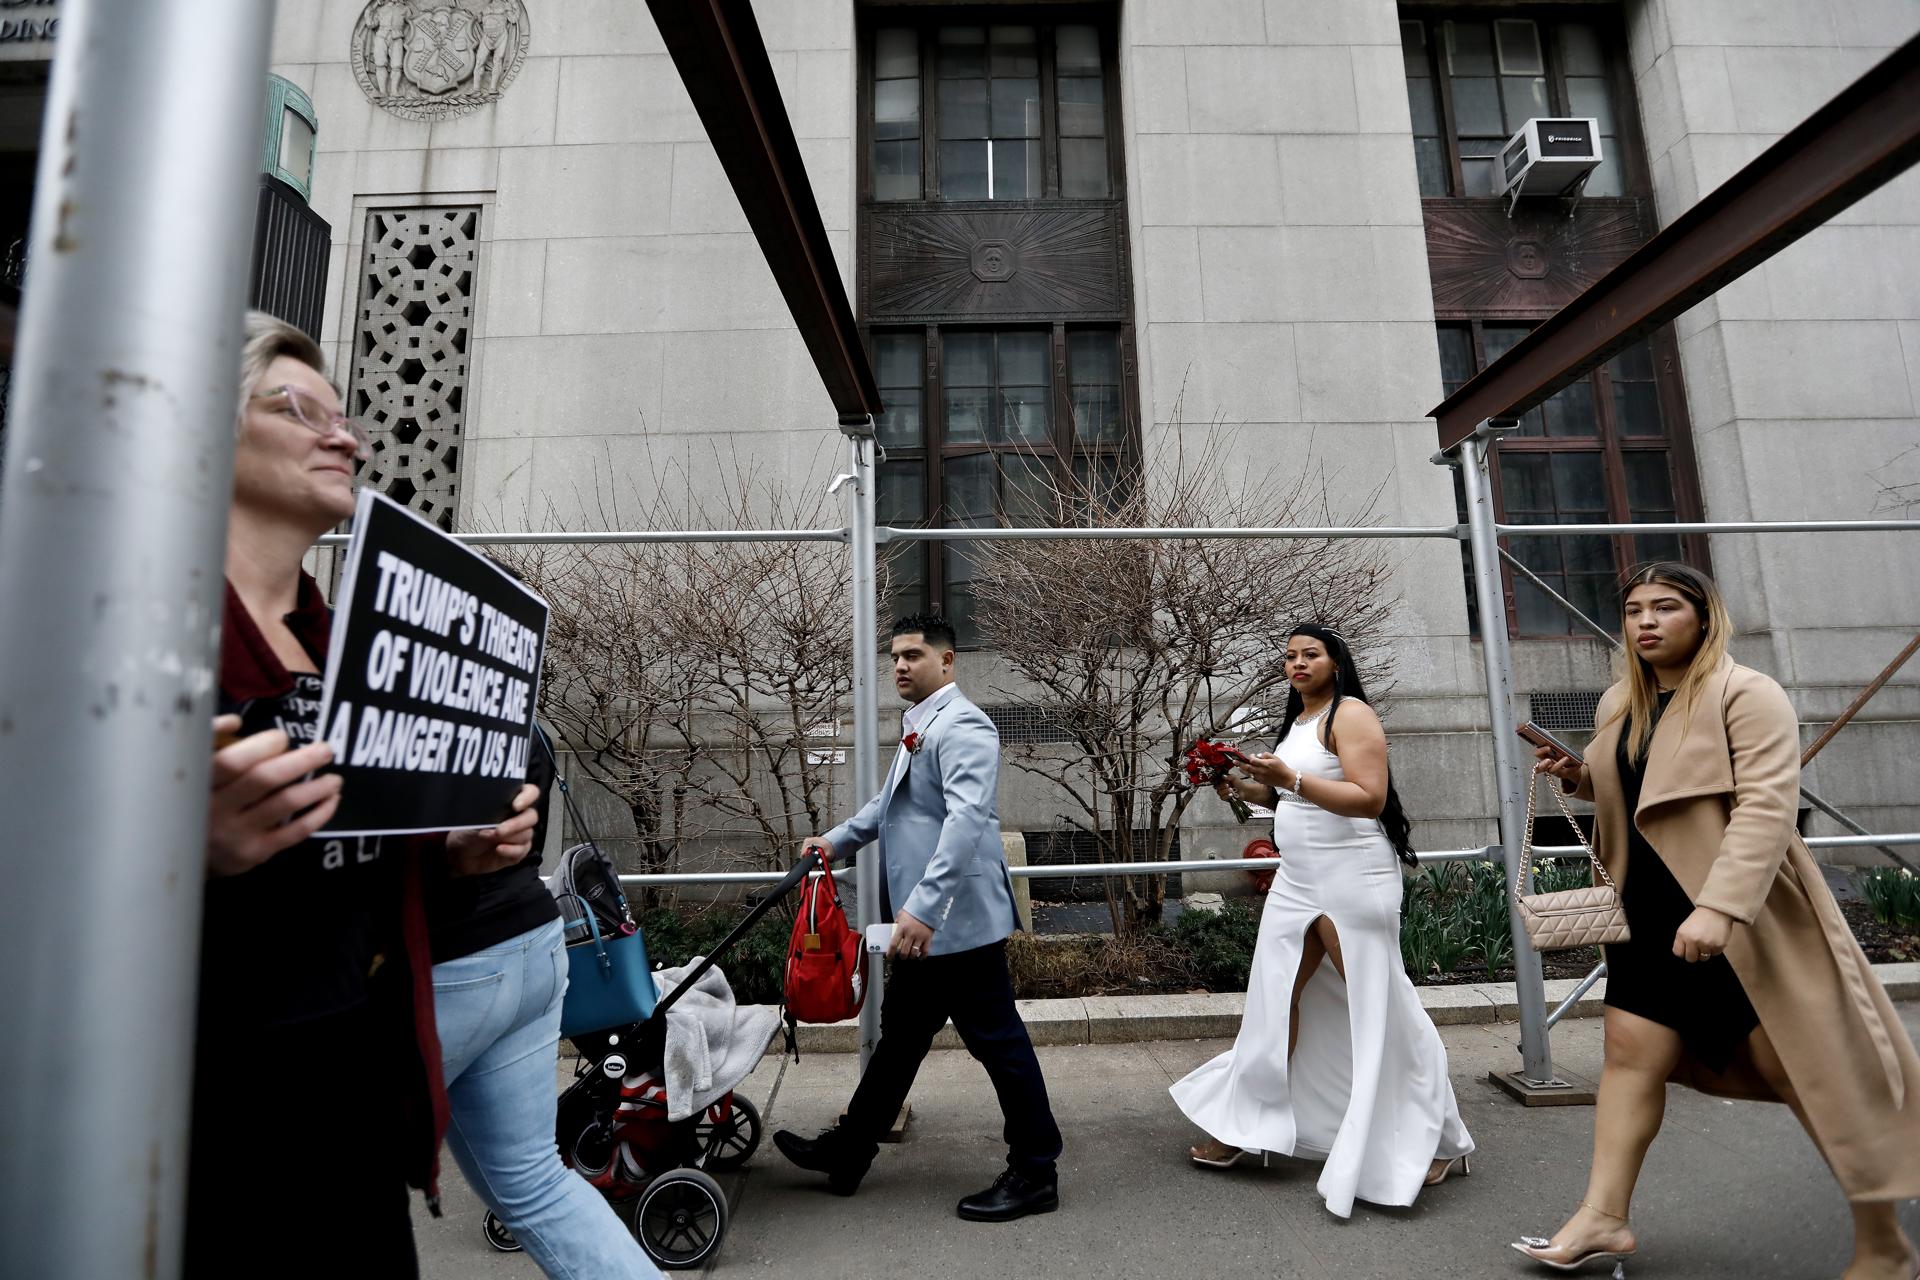 People walk outside the Manhattan Criminal Courthouse in New York while the grand jury examines the case against former President Donald Trump for allegedly making a hush money payment to porn star Stormy Daniels using campaign funds. EFE/EPA/Peter Foley